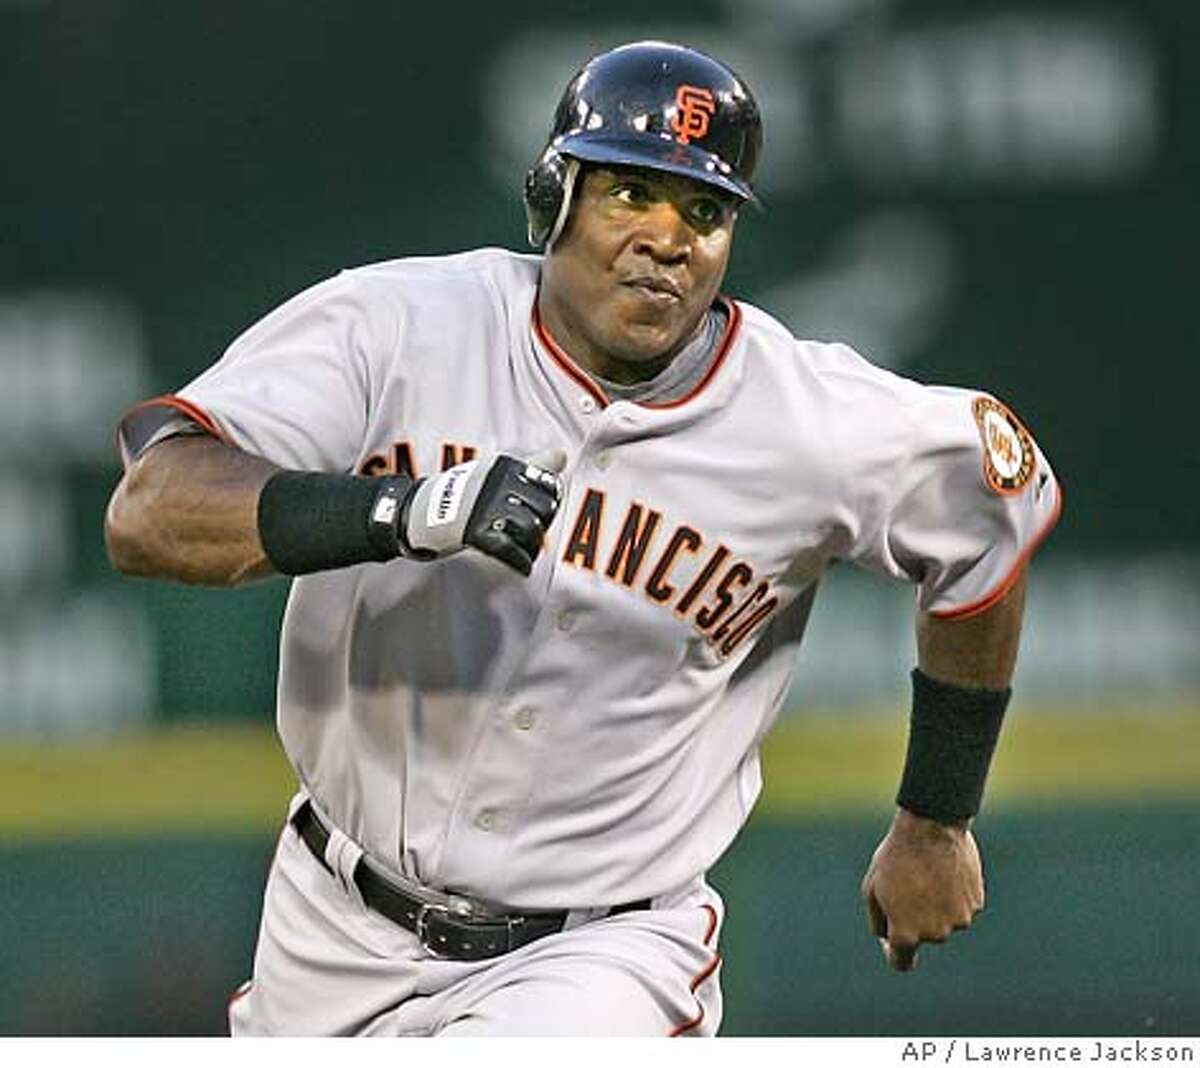 ** FILE ** San Francisco Giants' Barry Bonds rounds second base on his way to third on a Ray Durham double against the Washington Nationals in the fourth inning of a baseball game in Washington, in this July 26, 2006 file photo.. (AP Photo/Lawrence Jackson)